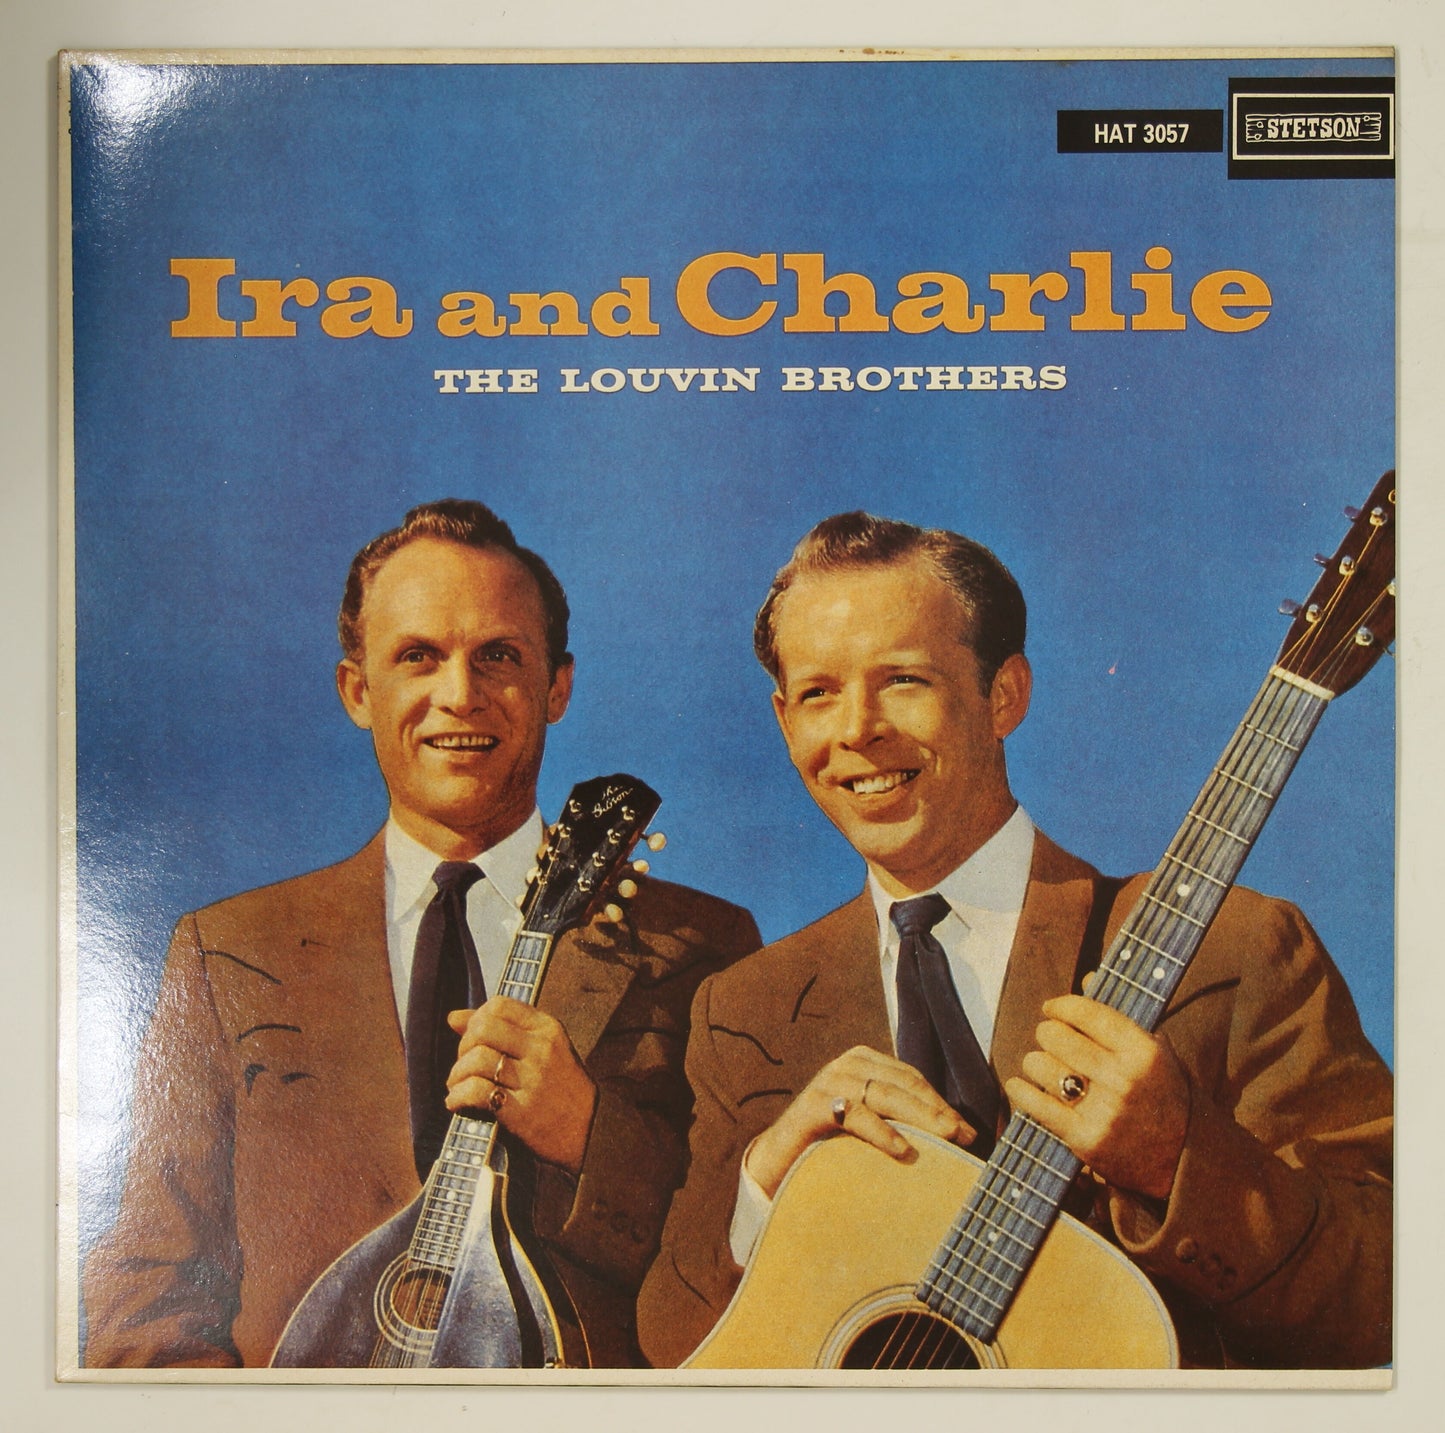 LOUVIN BROTHERS / IRA AND CHARLIE